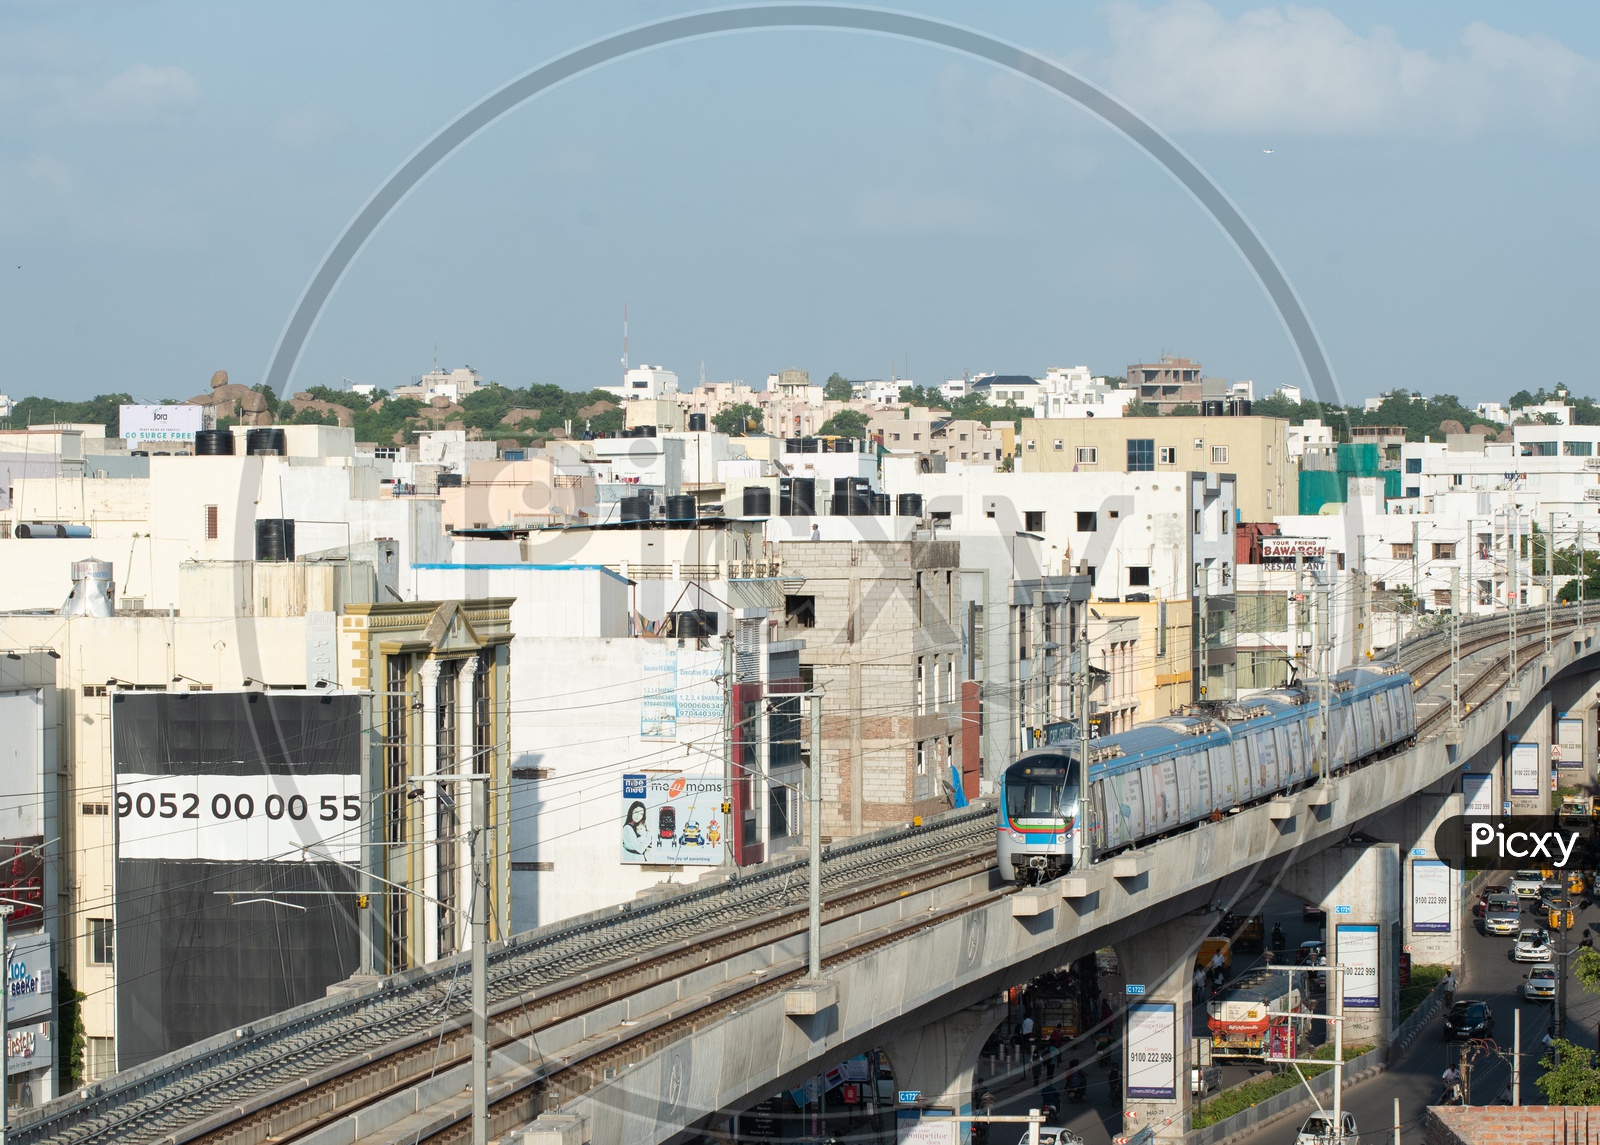 Hyderabad Metro Train running On Tracks  With High rise buildings in Background